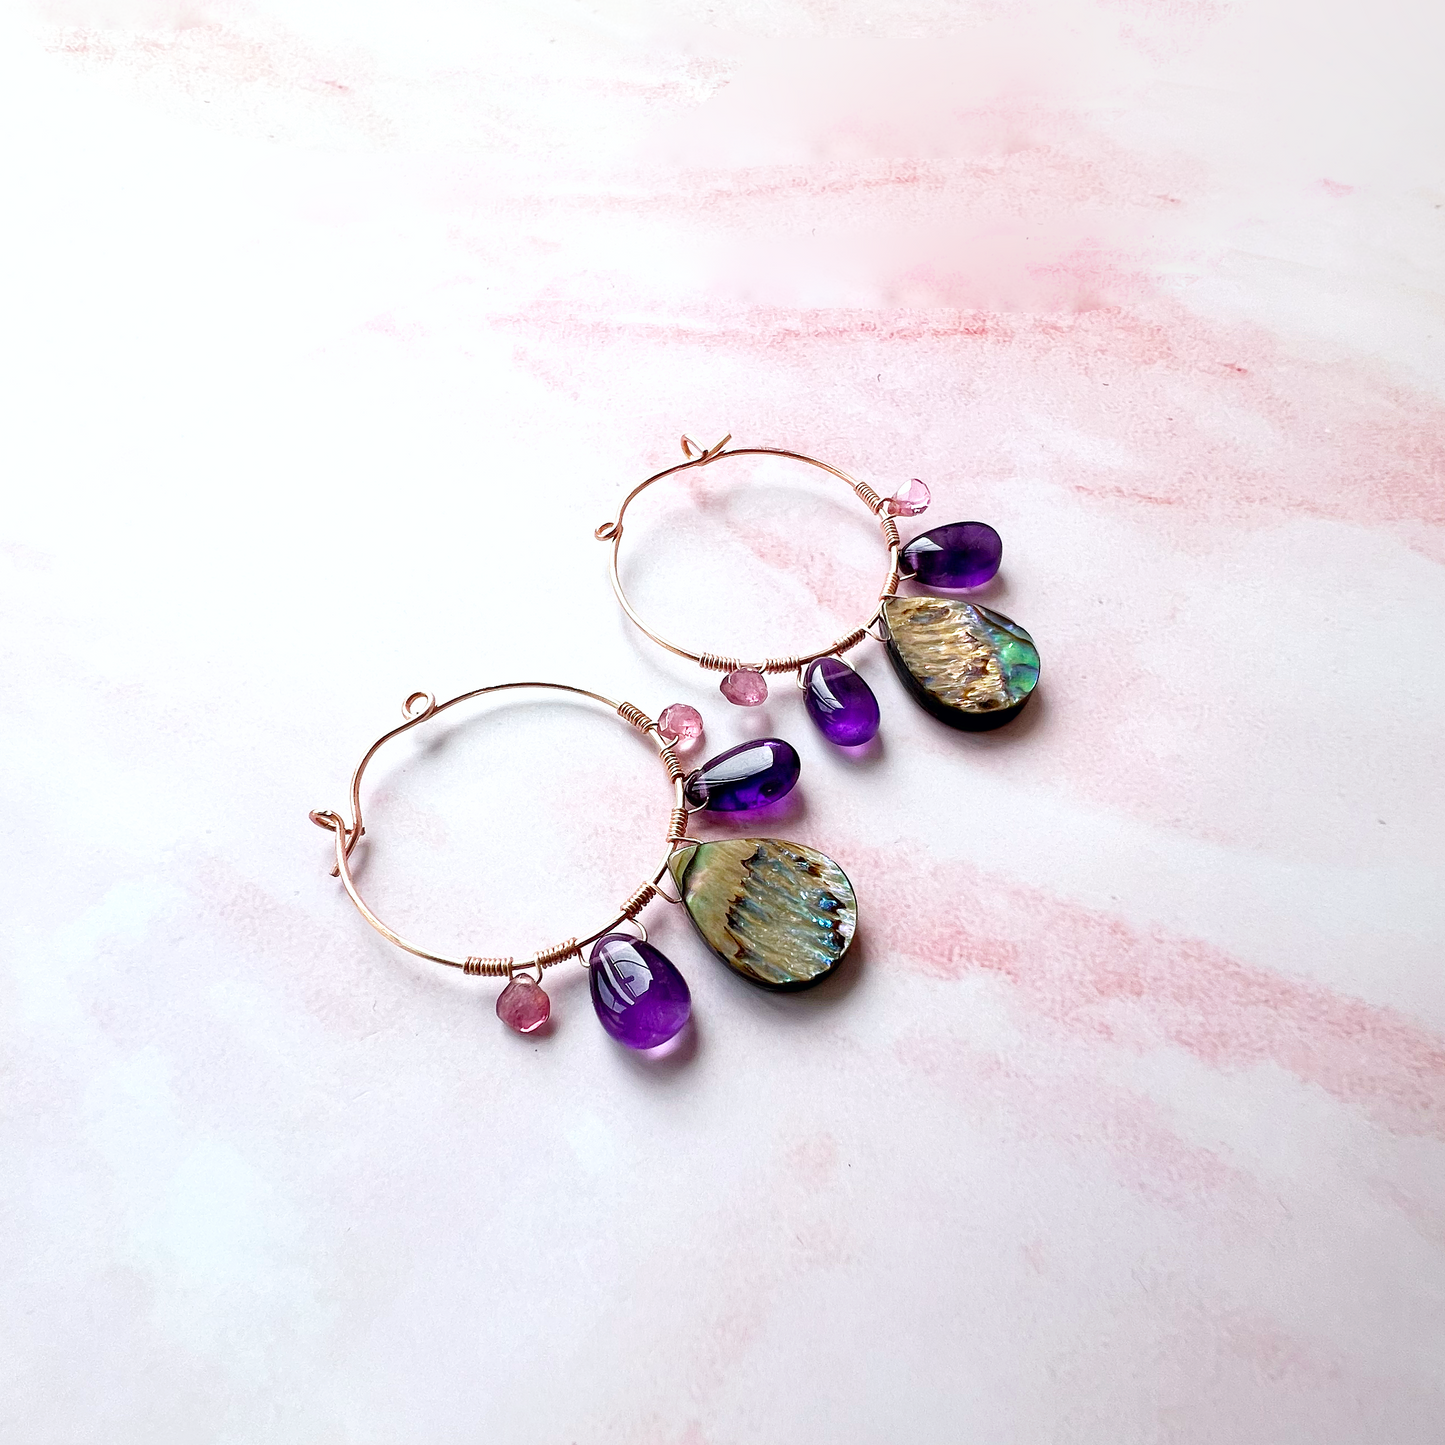 Peacock feather earrings with abalone, amethyst and pink tourmaline